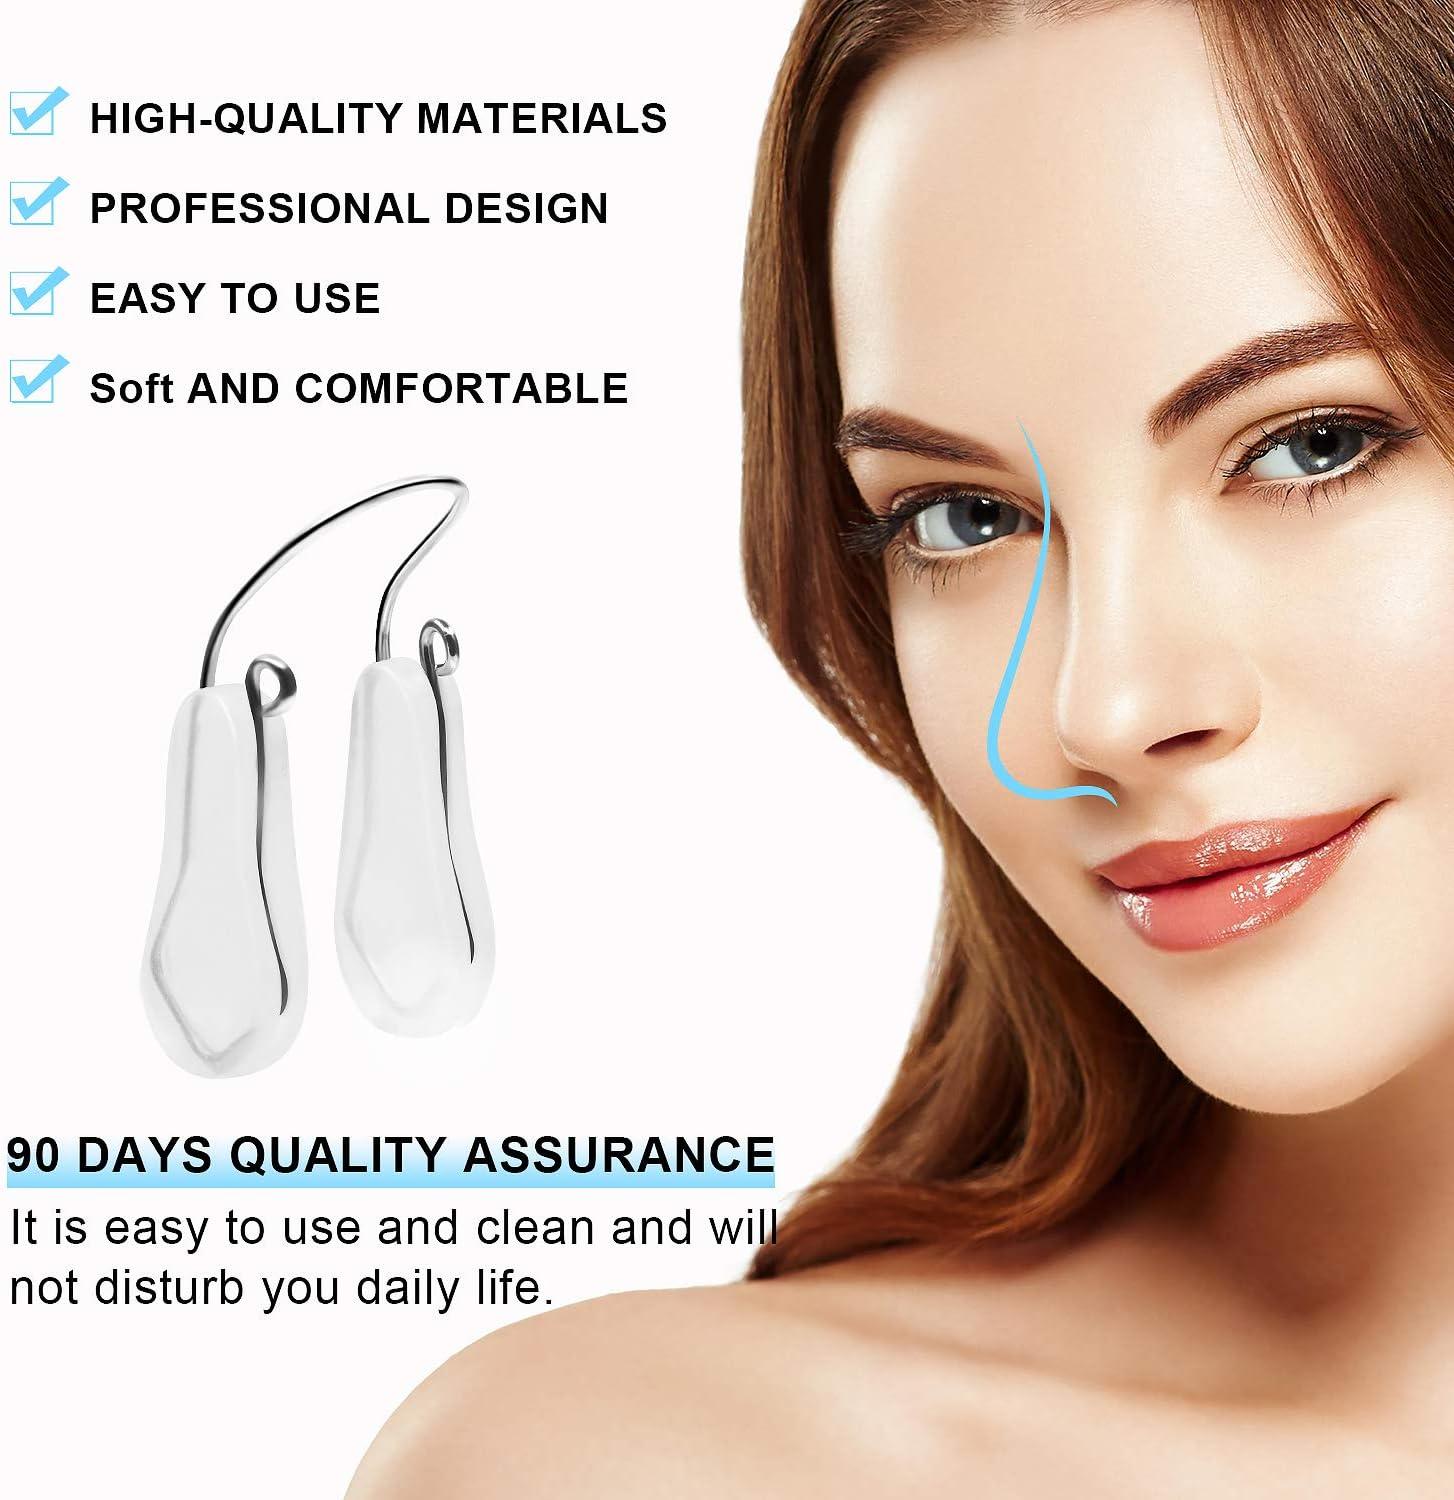 Nose Shaper Clip, Silicone Nose Up Lifter Nose Job Without Surgery